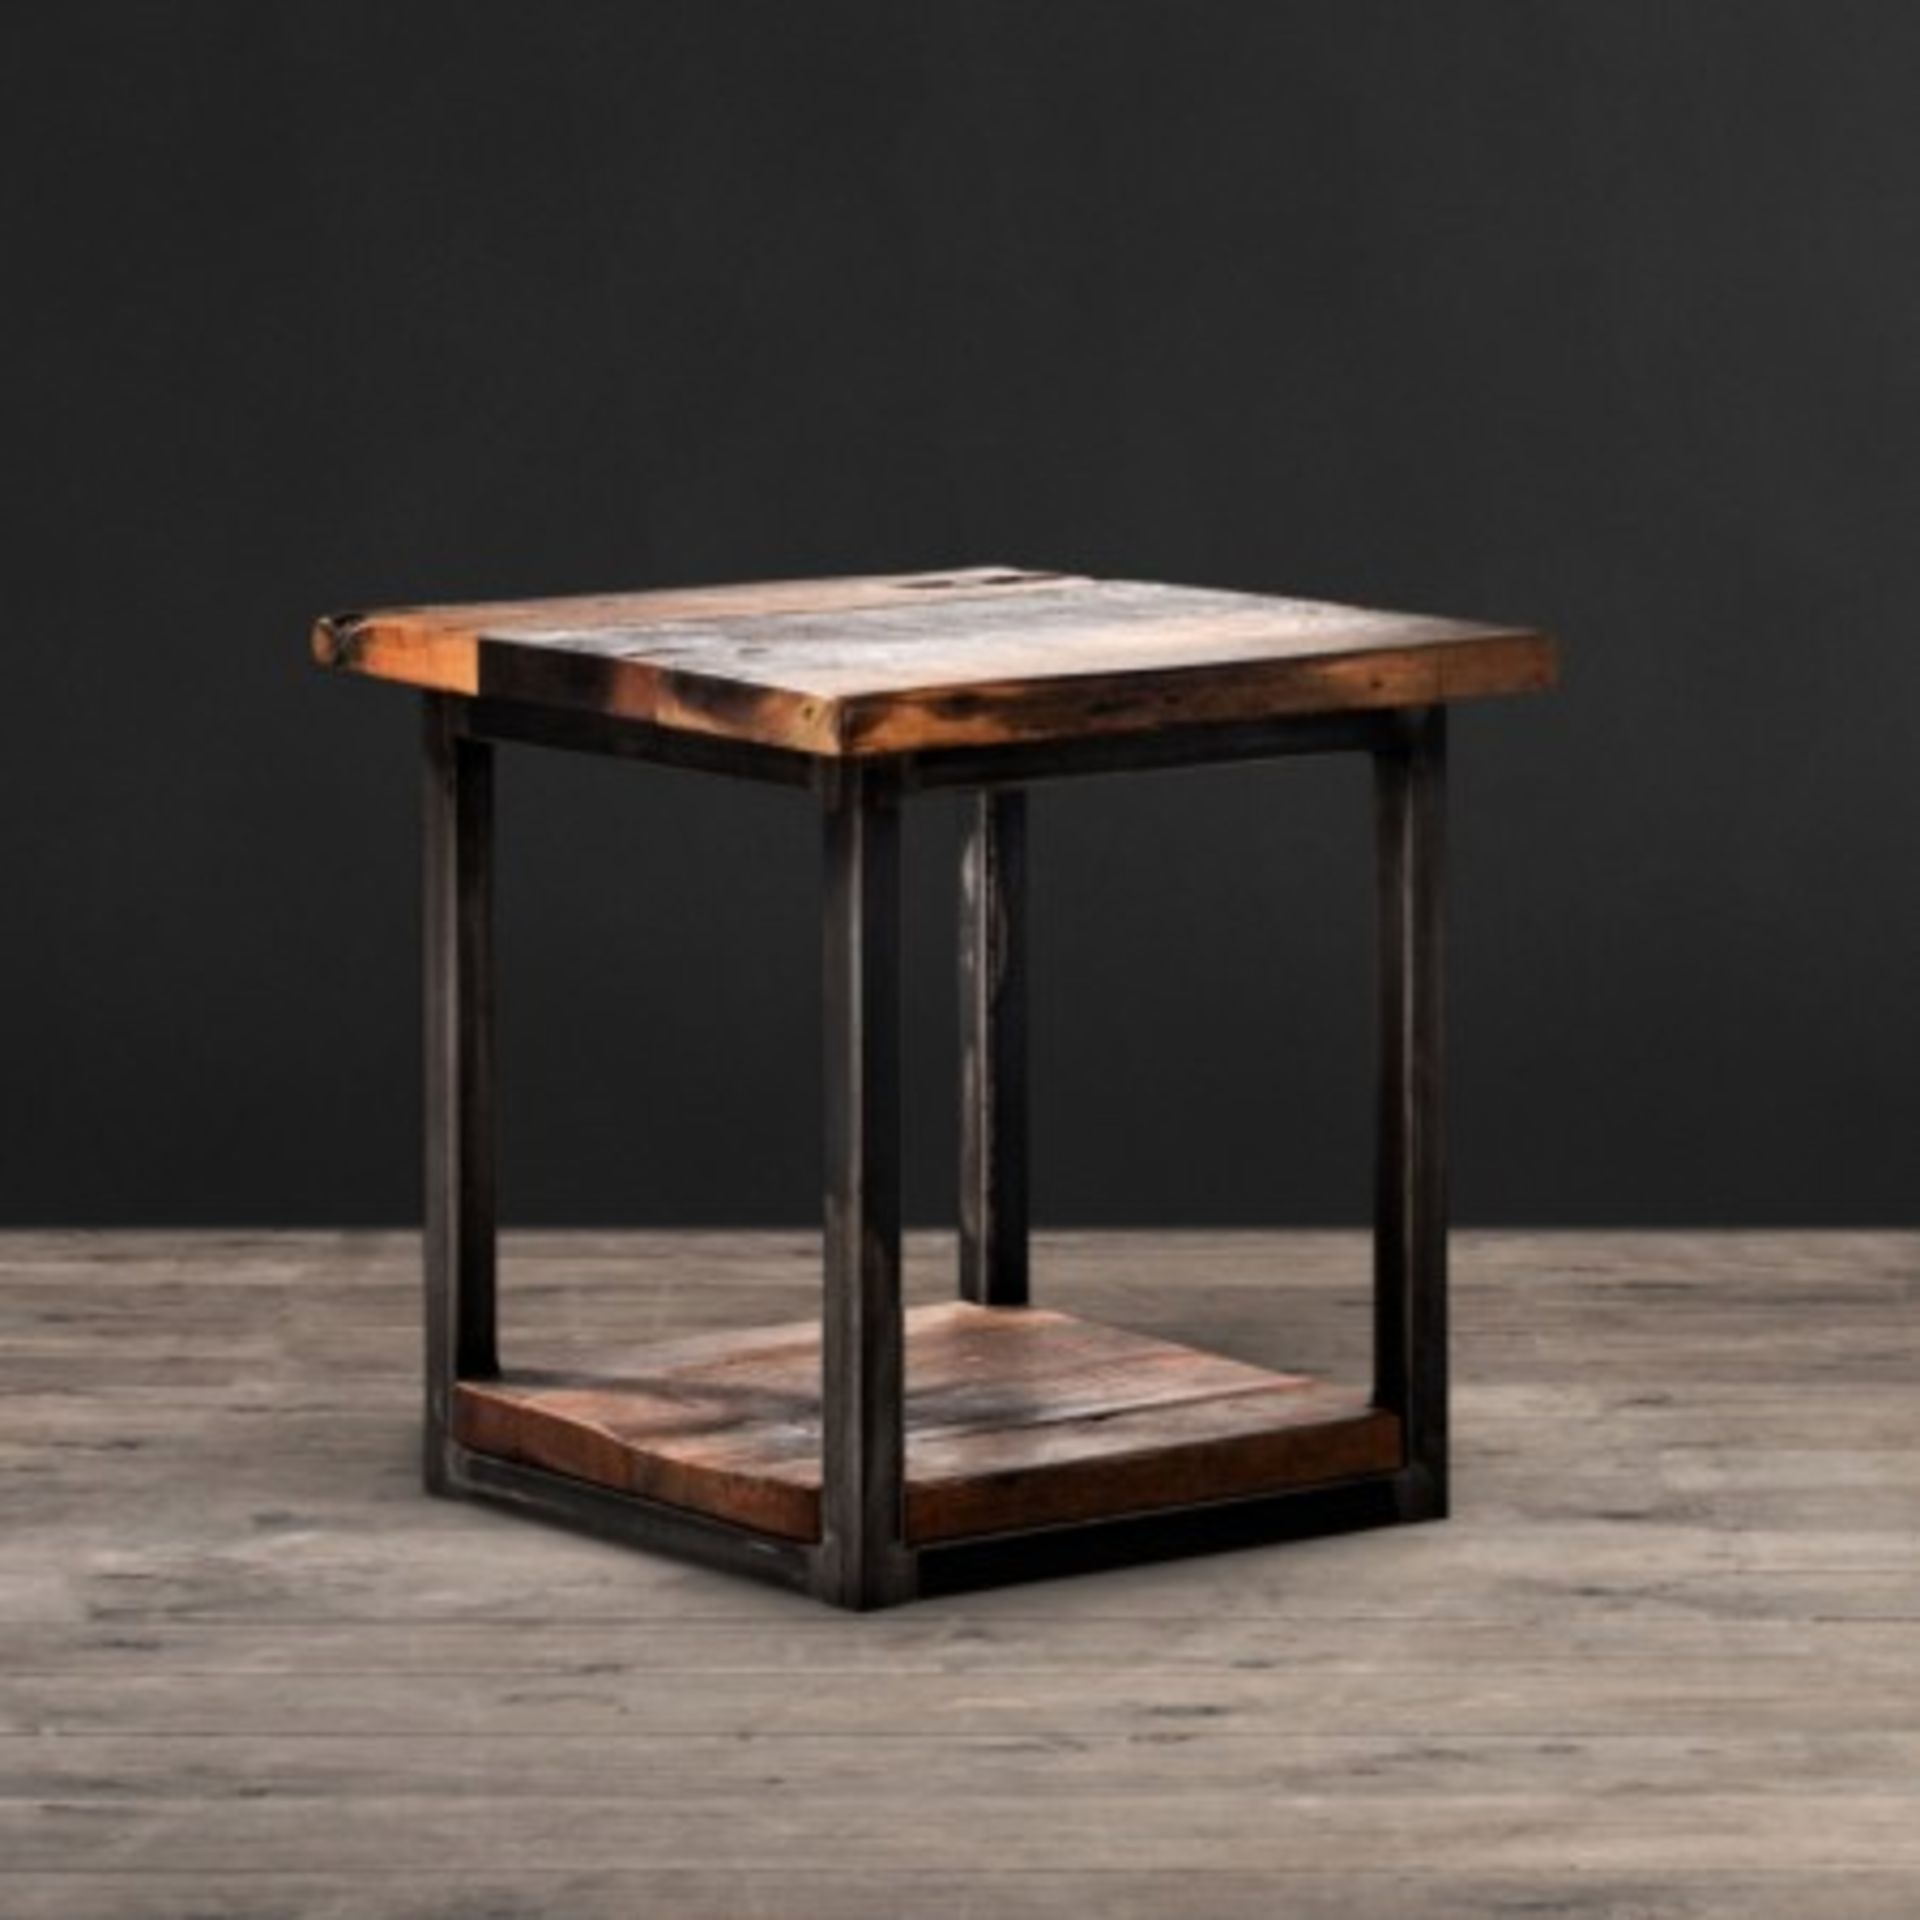 Axel MK2 Reclaimed Wood Side Table Sassafras Reclaimed Wood The Axel Range Crosses Old World And - Image 2 of 2